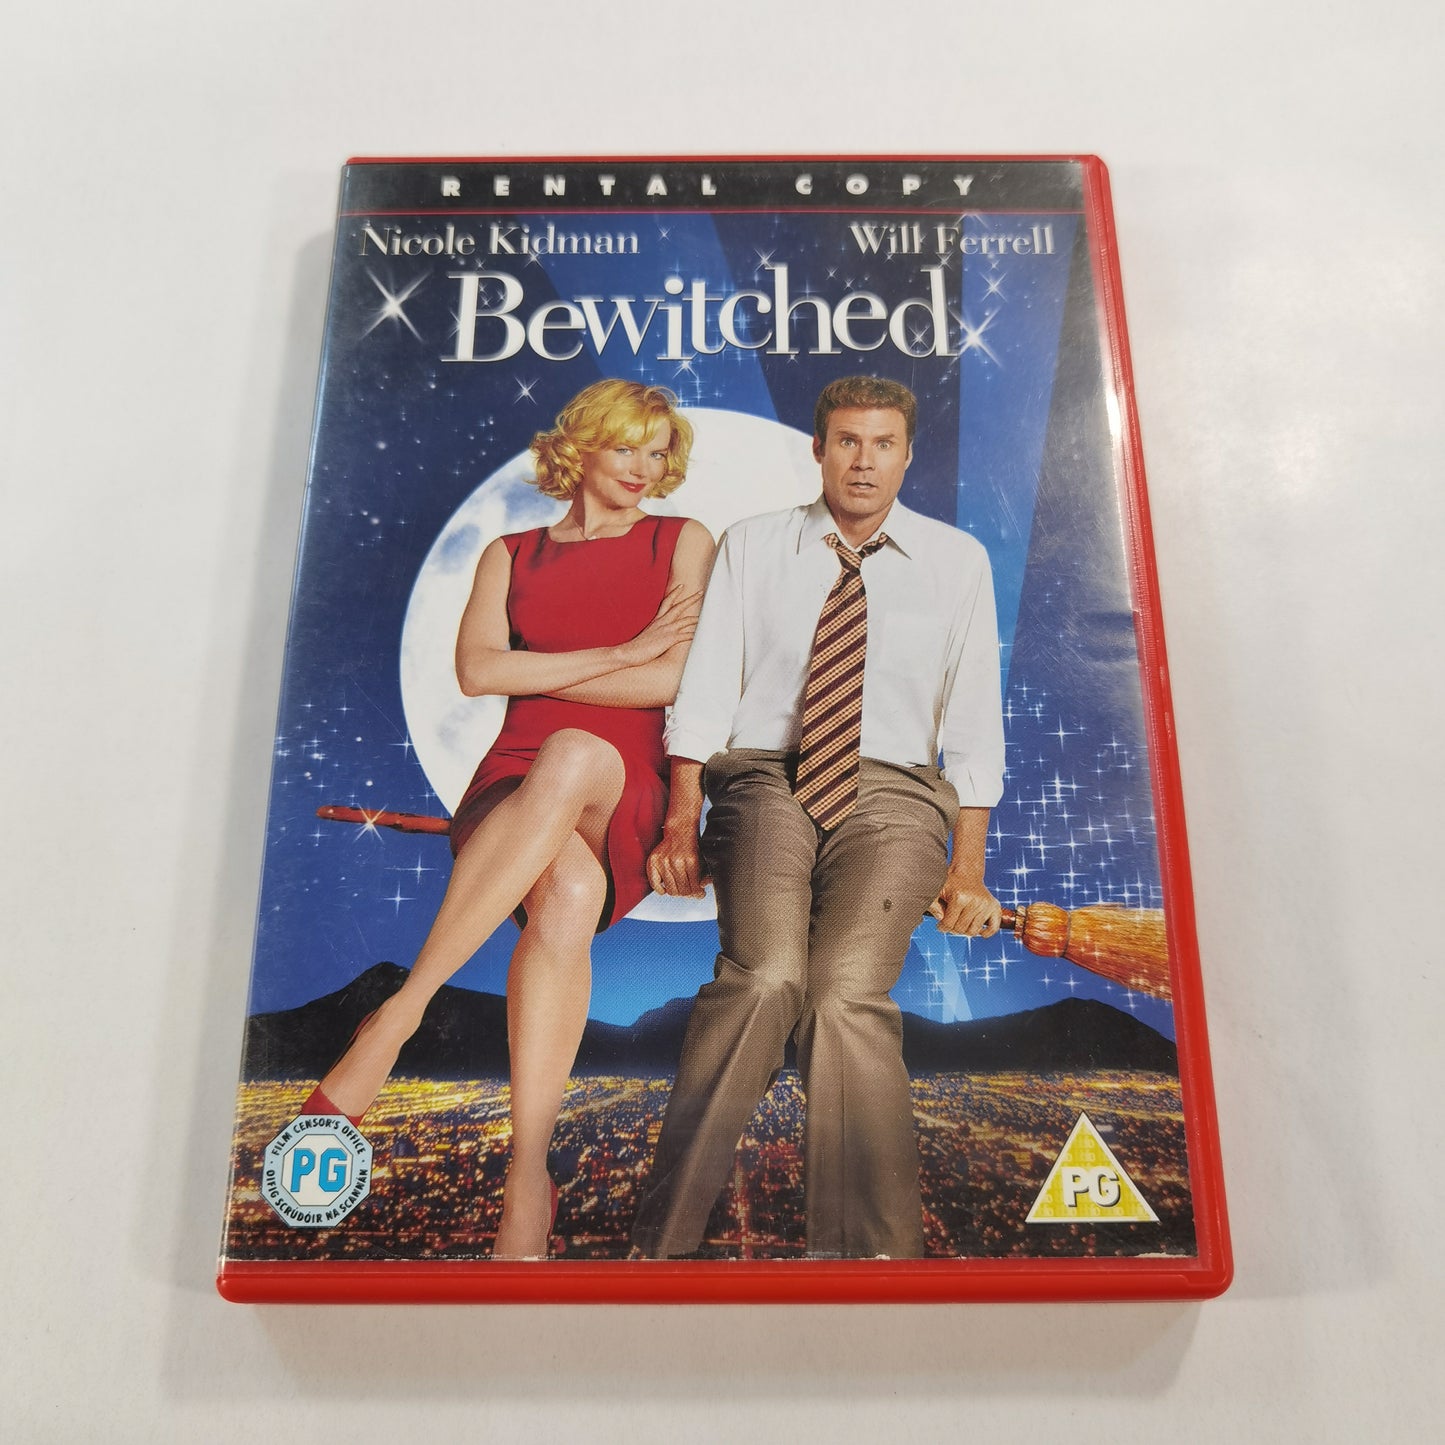 Bewitched (2005) - DVD UK 2005 RC